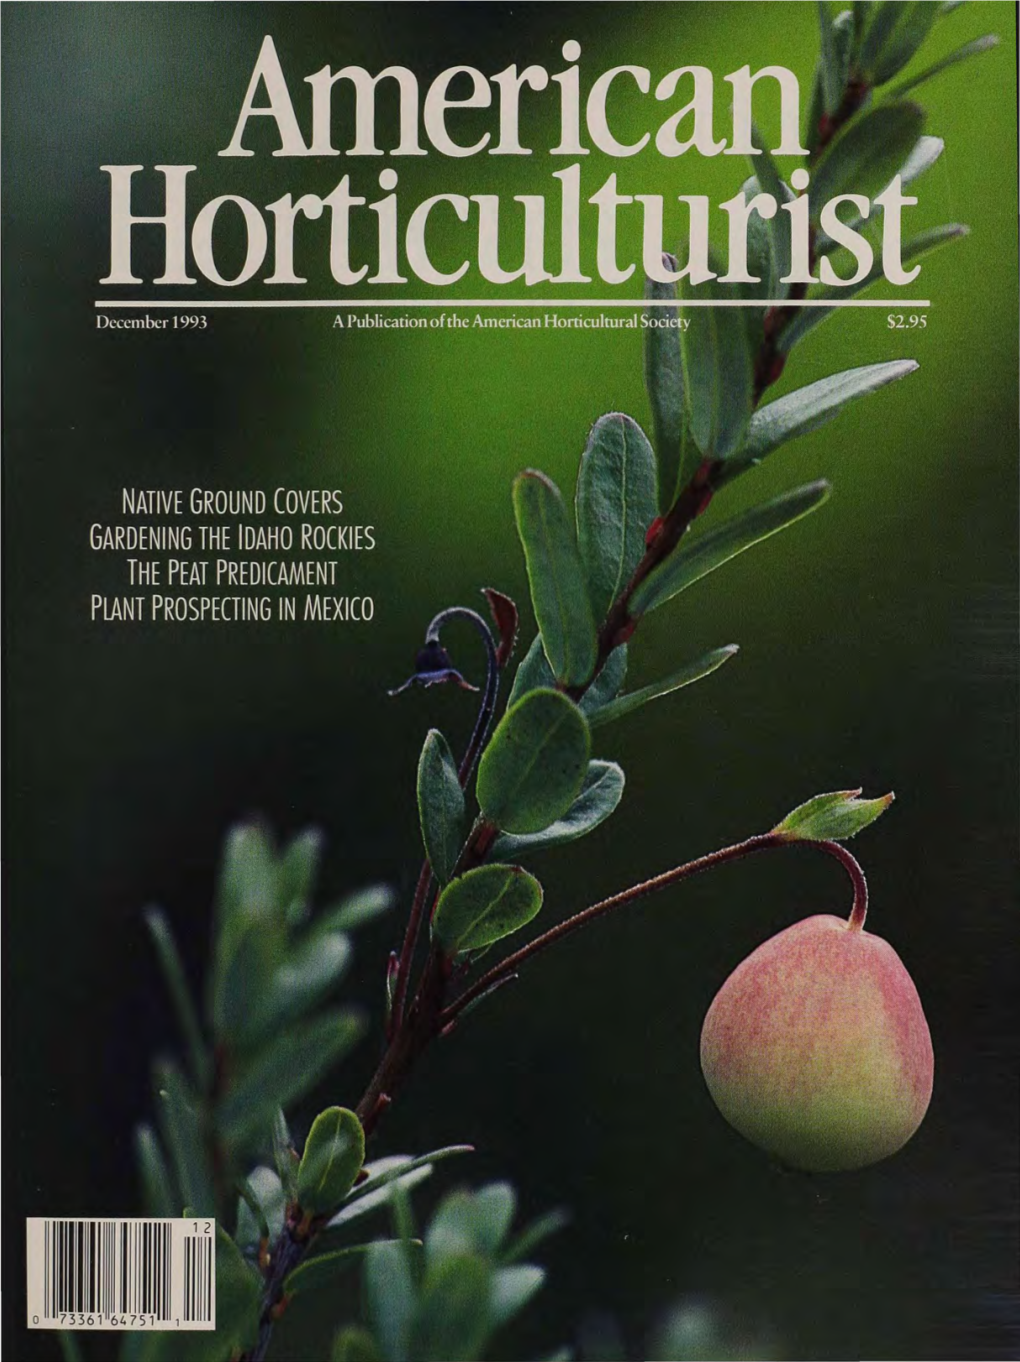 The AHS Encyclopedia of Gardening Puts the Latest in Gardening at Your Fingertips